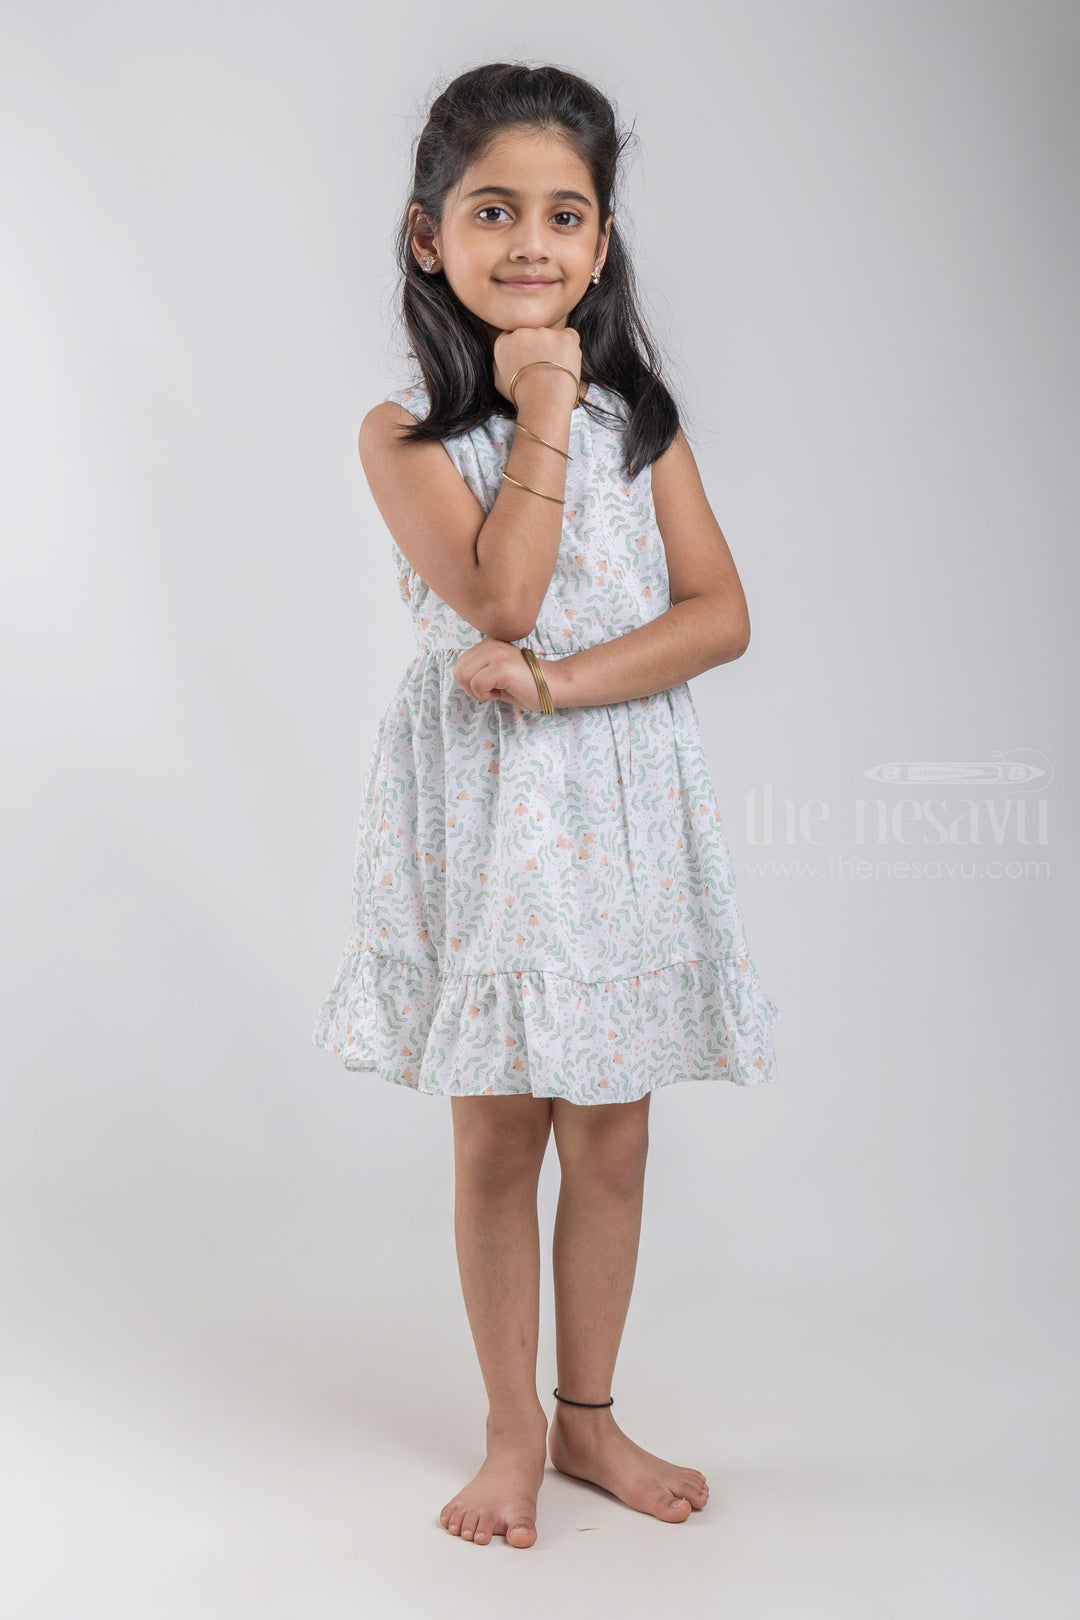 The Nesavu Girls Fancy Frock All Over Floral Printed White Georgette Frock For Girls psr silks Nesavu 18 (2Y) / Green GFC1074A